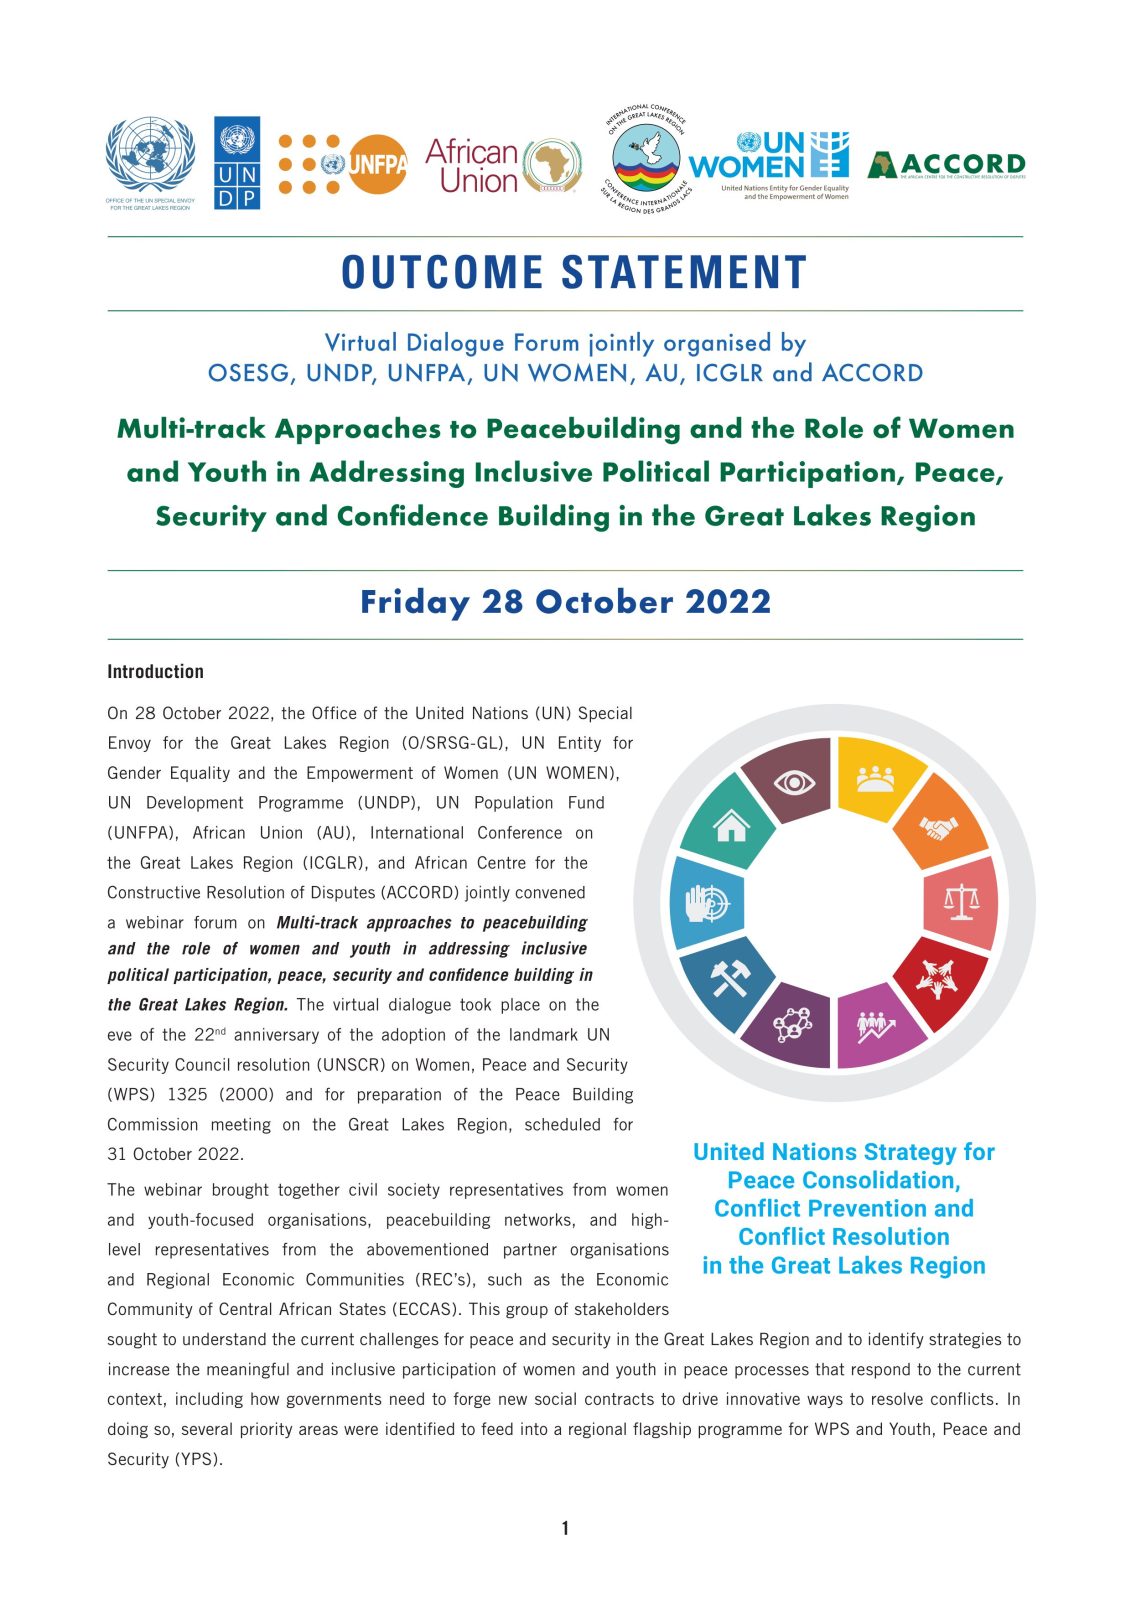 Outcome Statement - Webinar Multi-track Approaches to Peacebuilding and the Role of Women Final English (1)